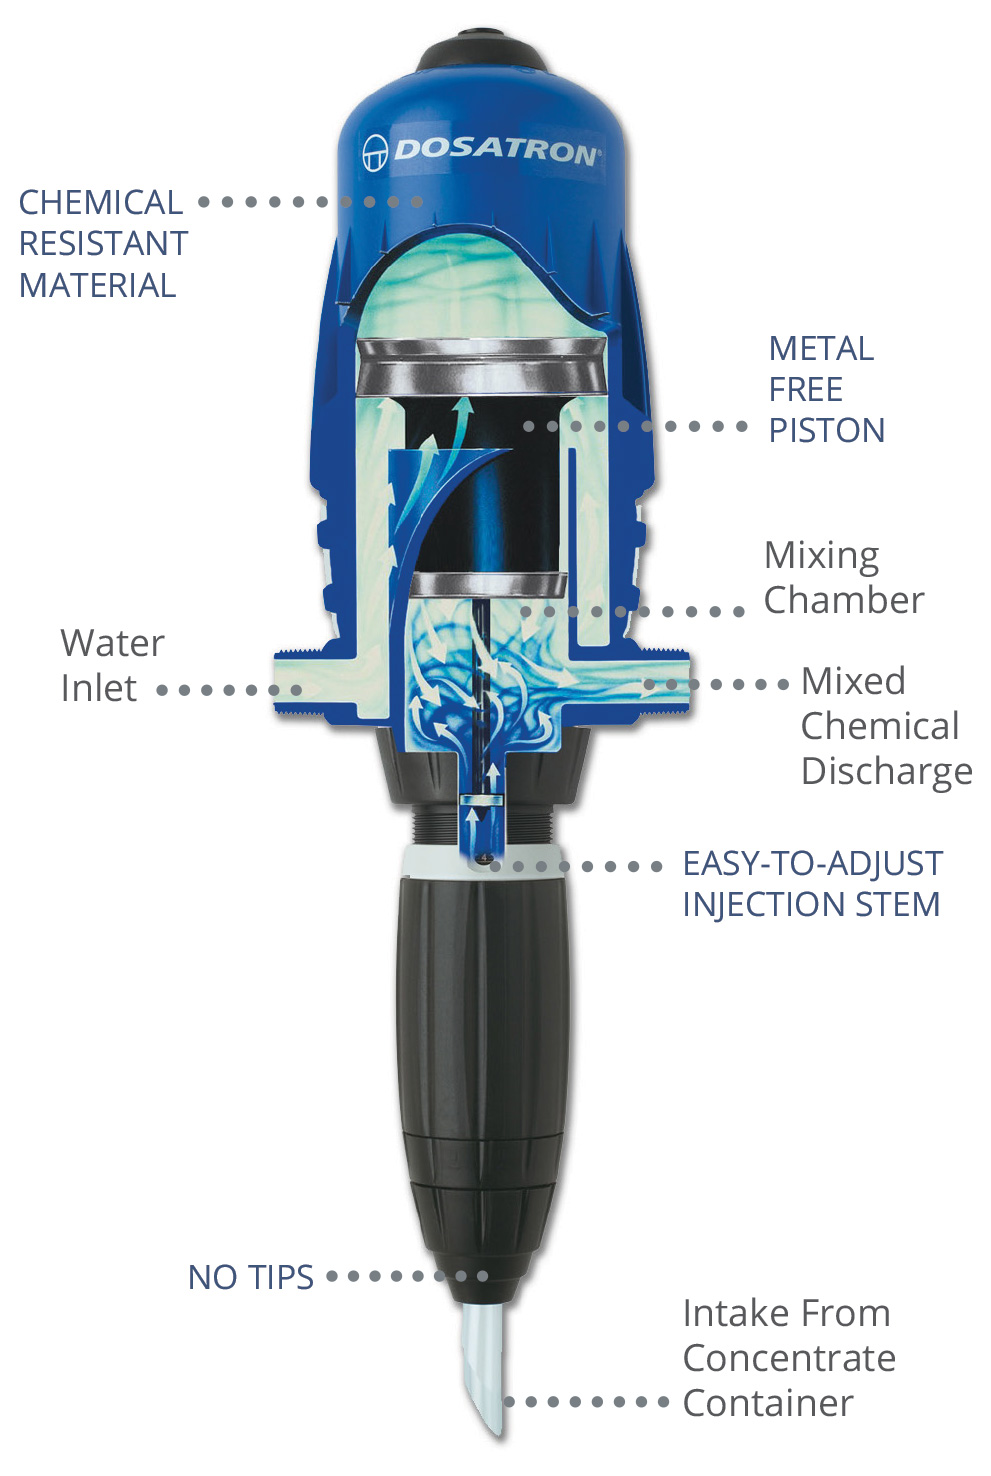 Picture of Chemical Injector, Kynar Body. MAX 11 GPM, 85 PSI, 112:1 to 1000:1 Injection Ratio, 1/2" MPT, Kalrez Seal, Industrial Model for Viscous Chemicals